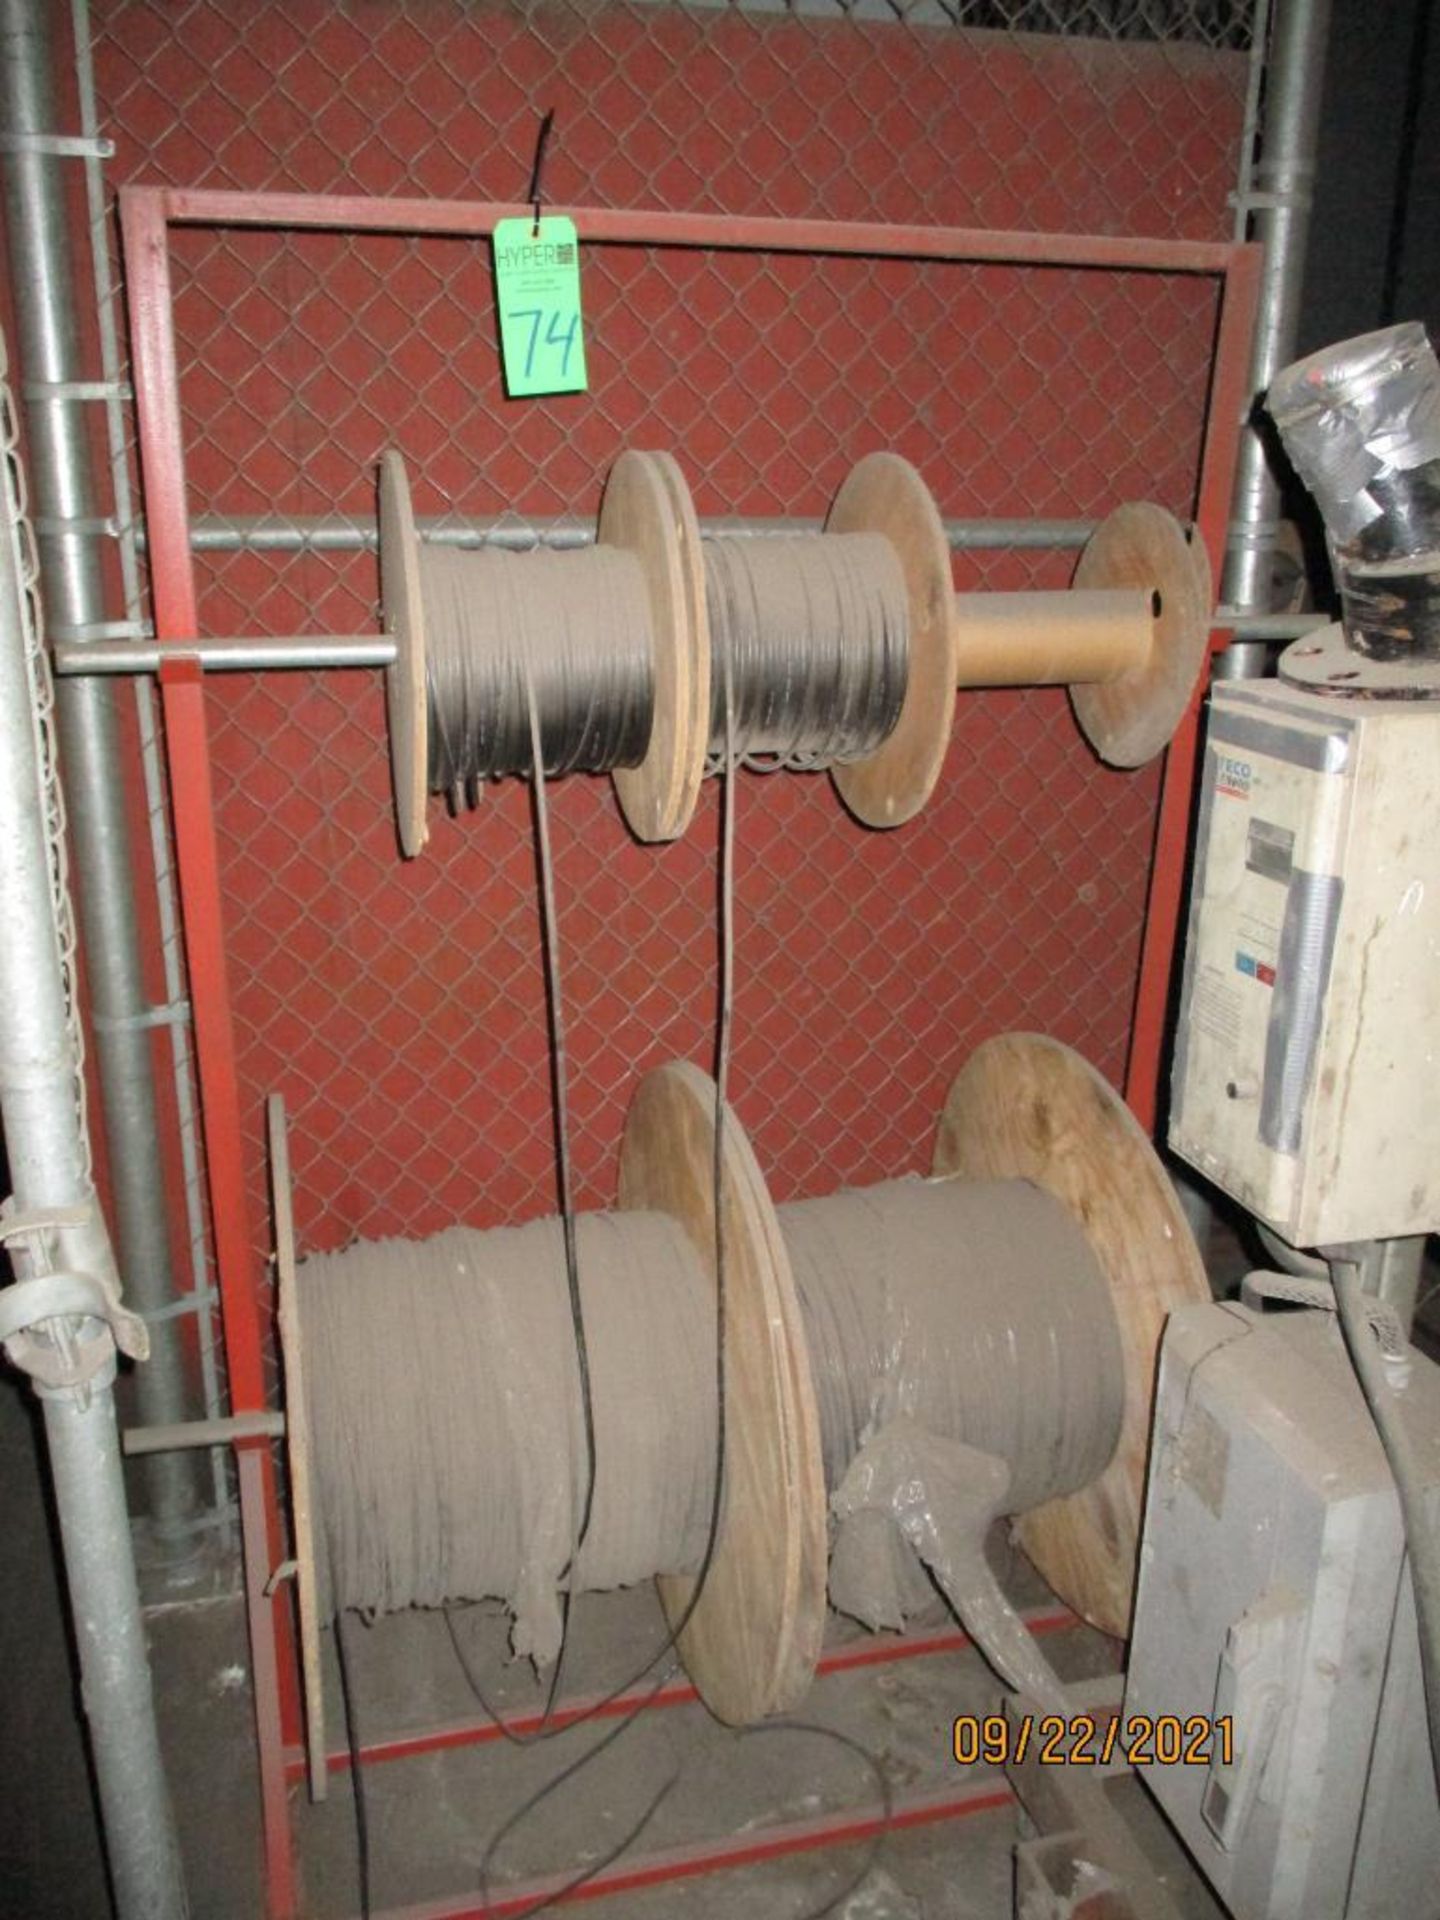 Lot c/o: Large Quantity Of Assorted Electrical Wire With Some Boxes, Located In Upstairs Mezzanine - Image 15 of 17